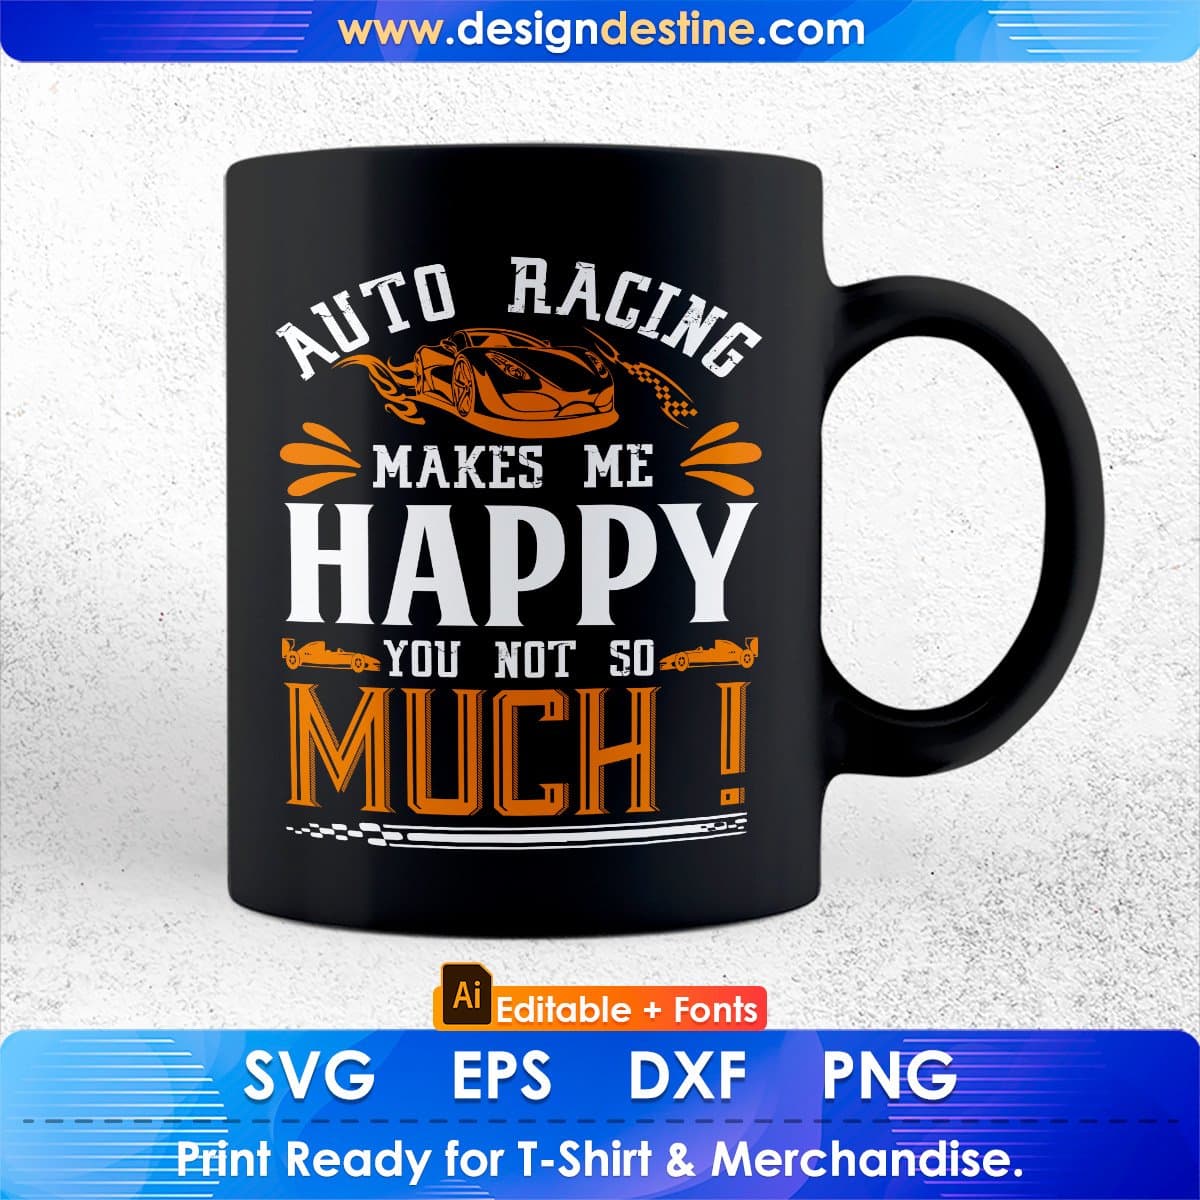 Auto Racing Makes Me Happy You Not So Much Editable T shirt Design In Ai Svg Printable Files